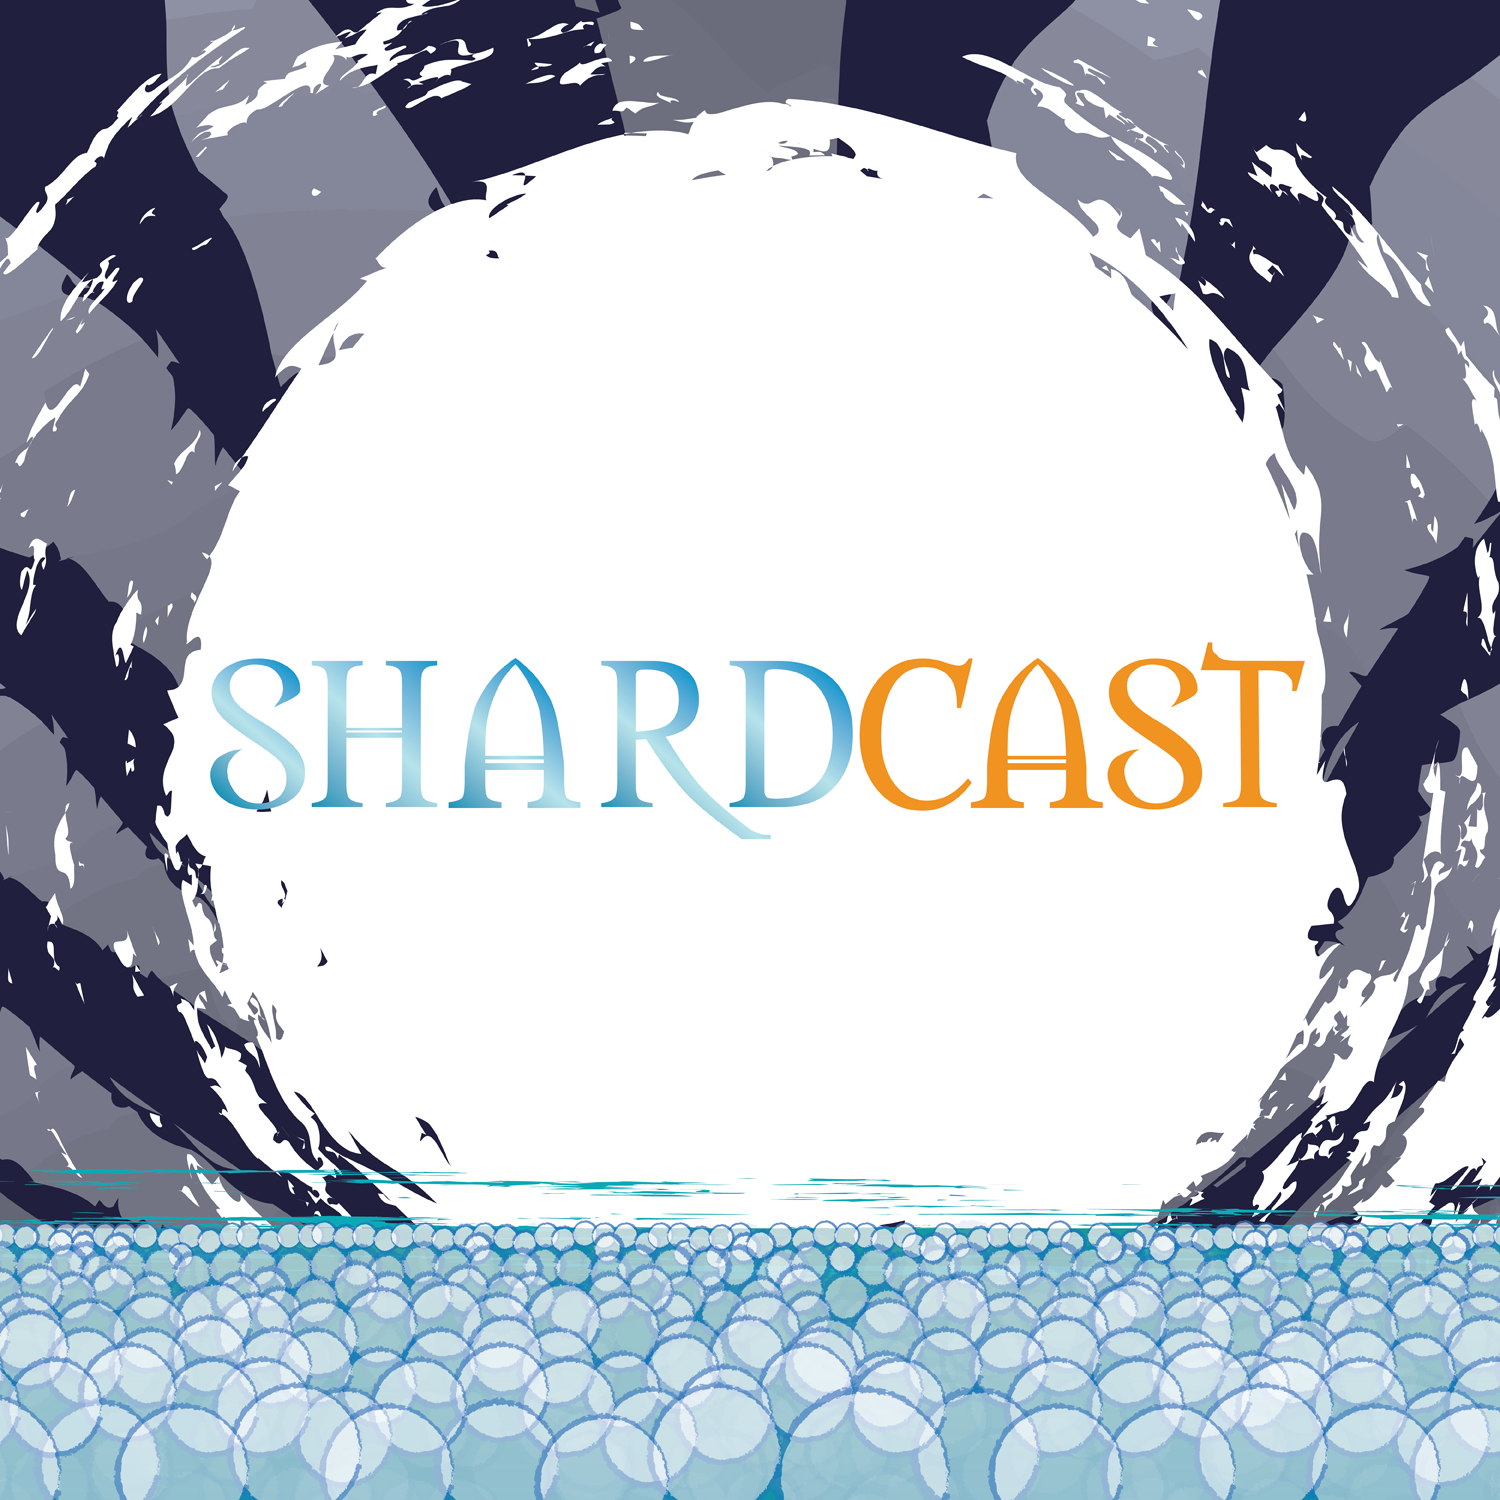 More information about "Shardcast: Evershore Reactions"